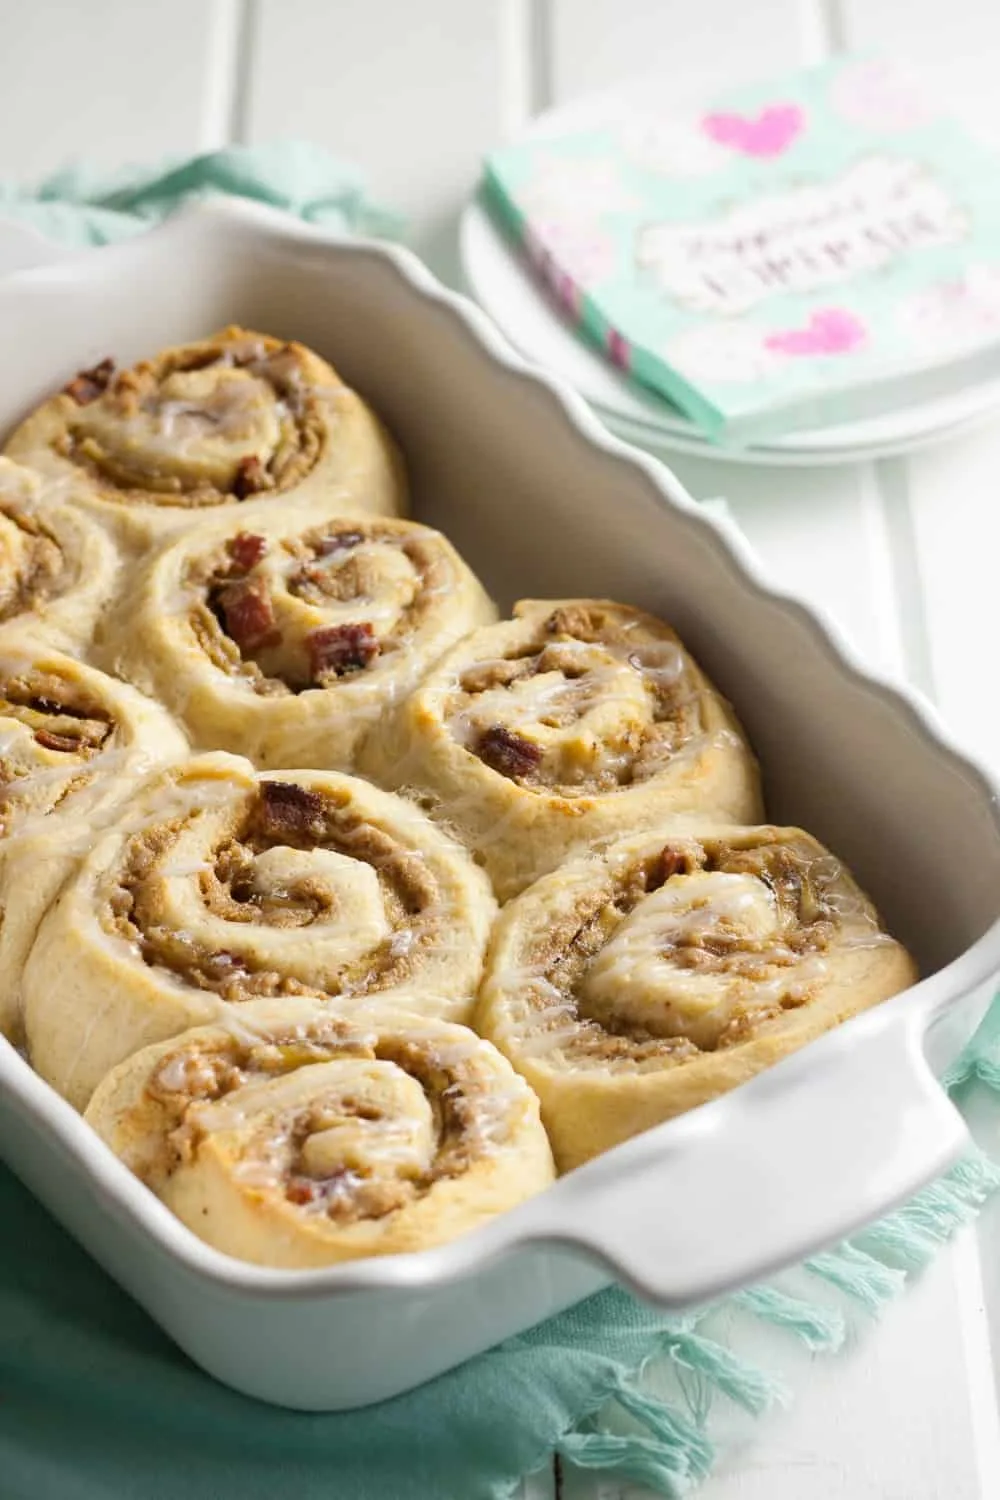 A sweet roll worthy of The King of Rock and Roll, these peanut butter, banana, and bacon delights are aptly titled, Elvis Sweet Rolls. * Recipe on GoodieGodmother.com